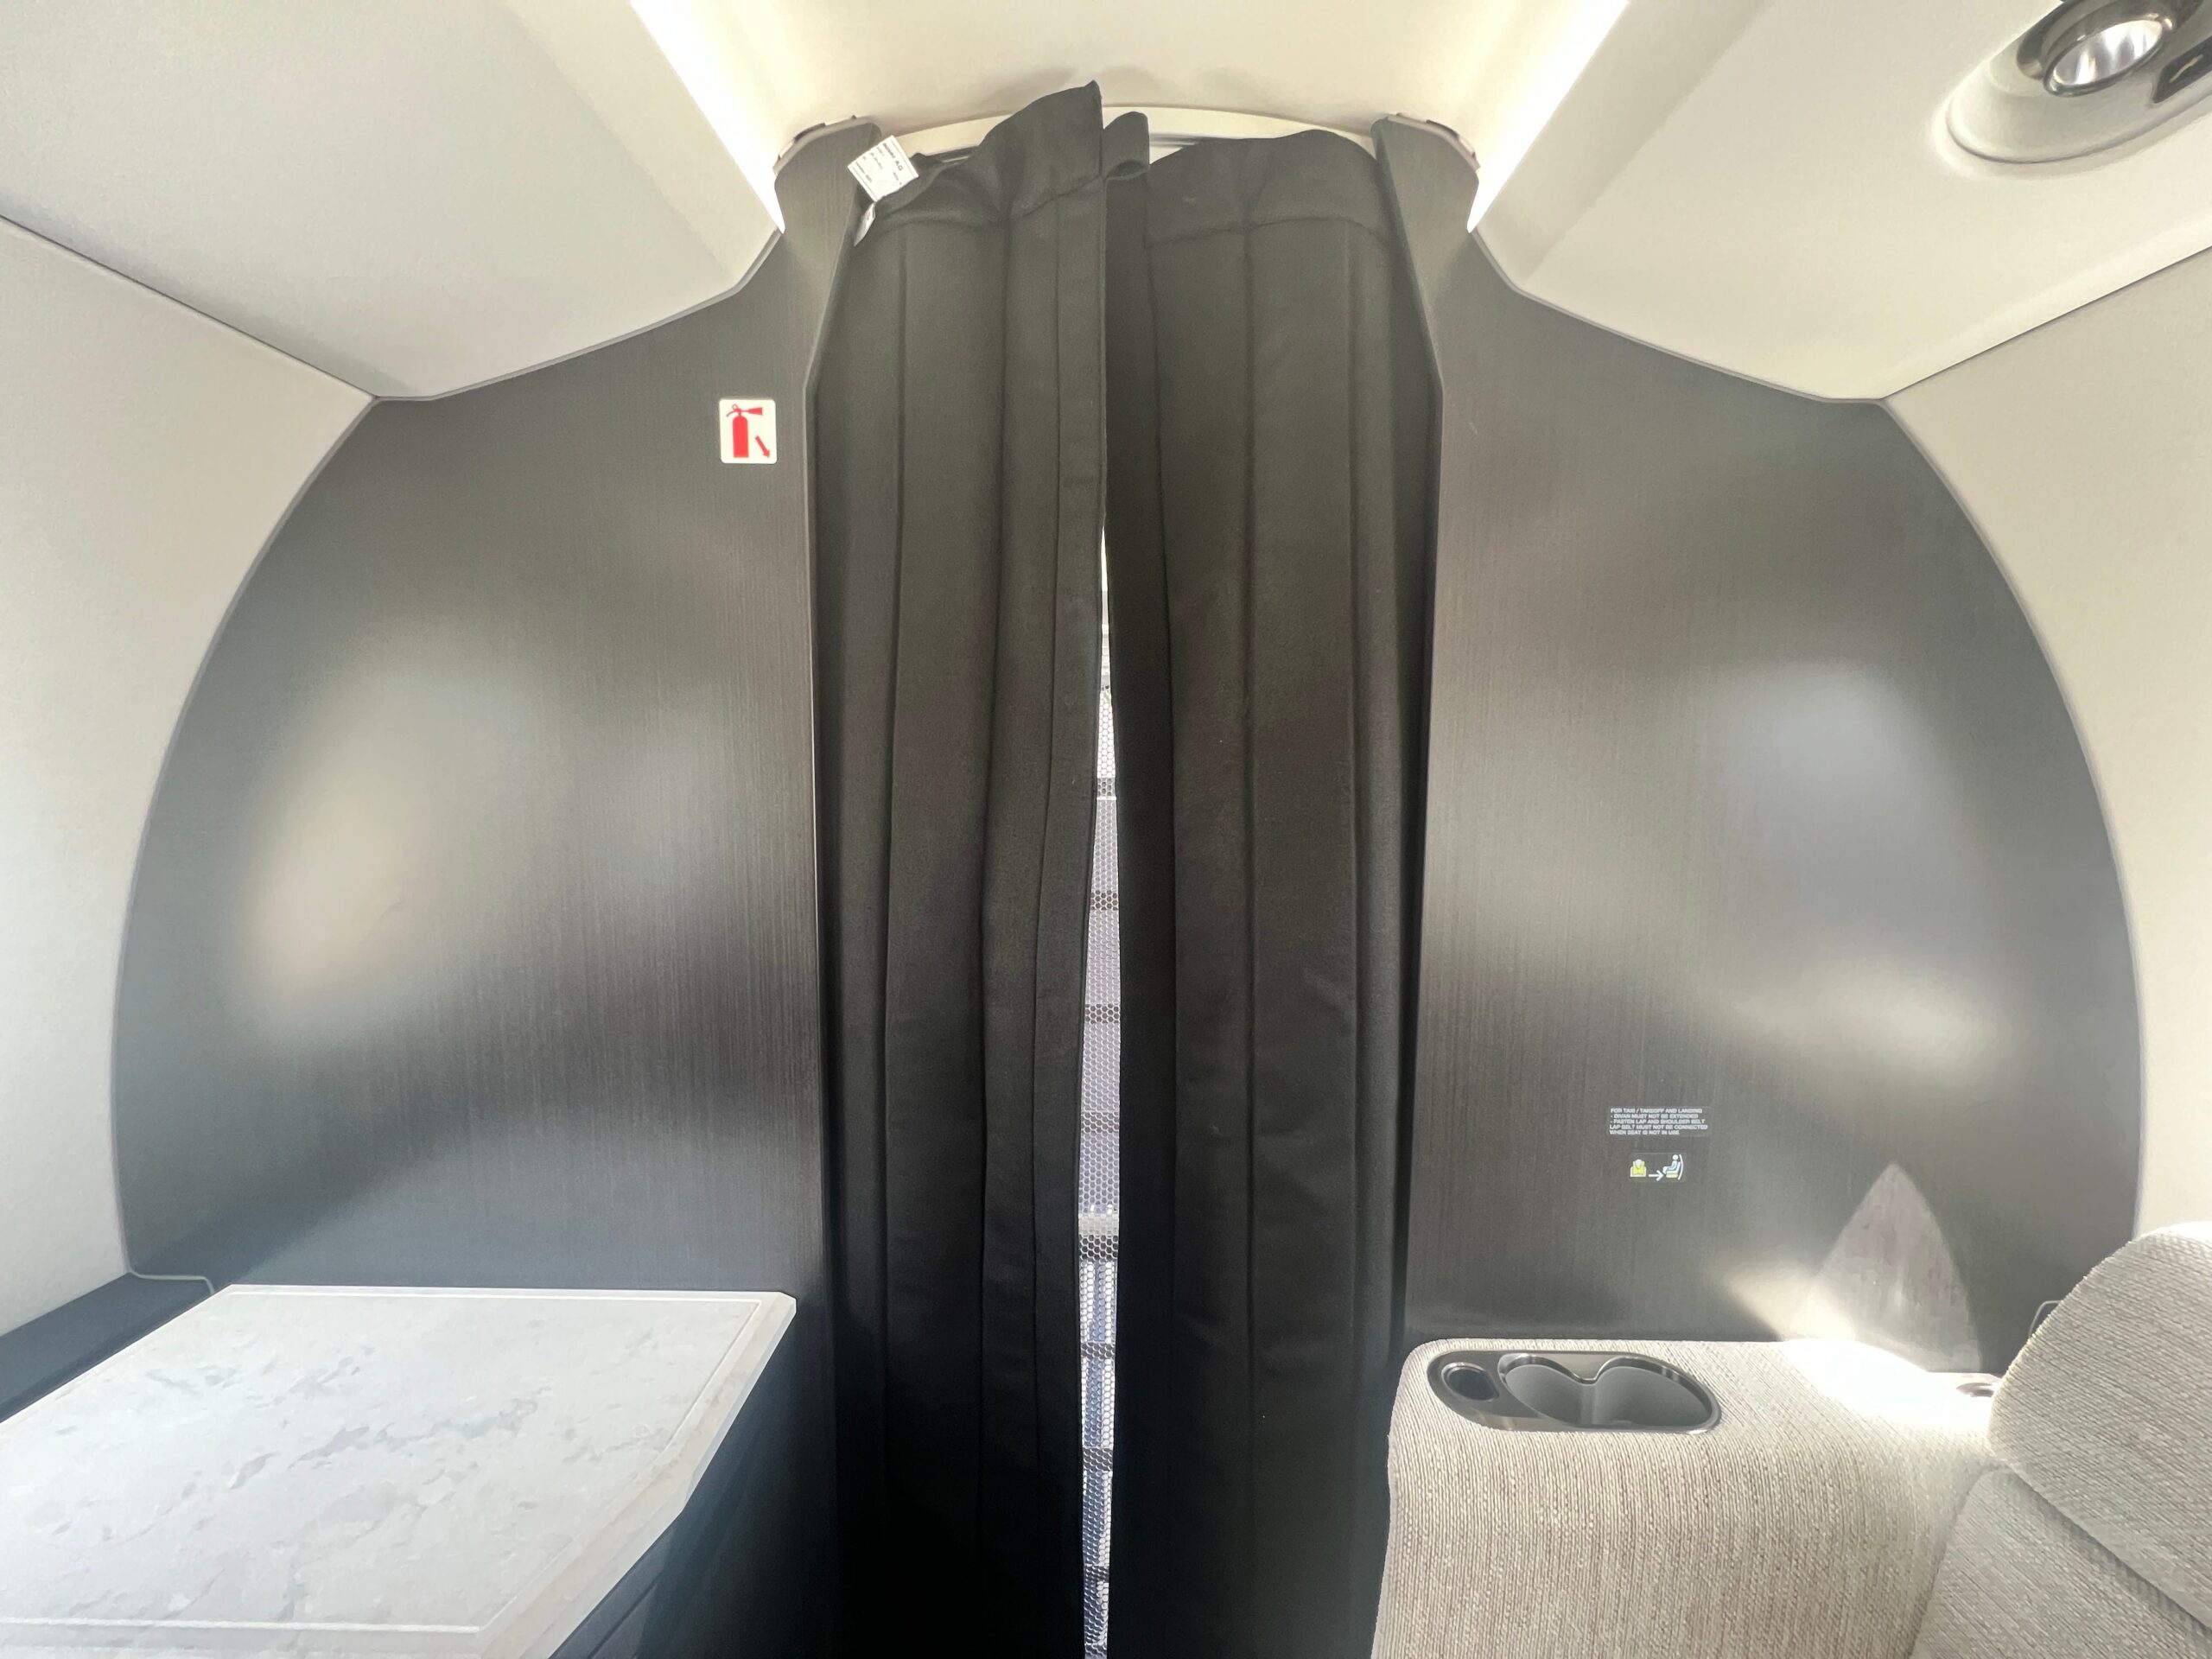 A curtain at the aft of a Pilatus PC-24